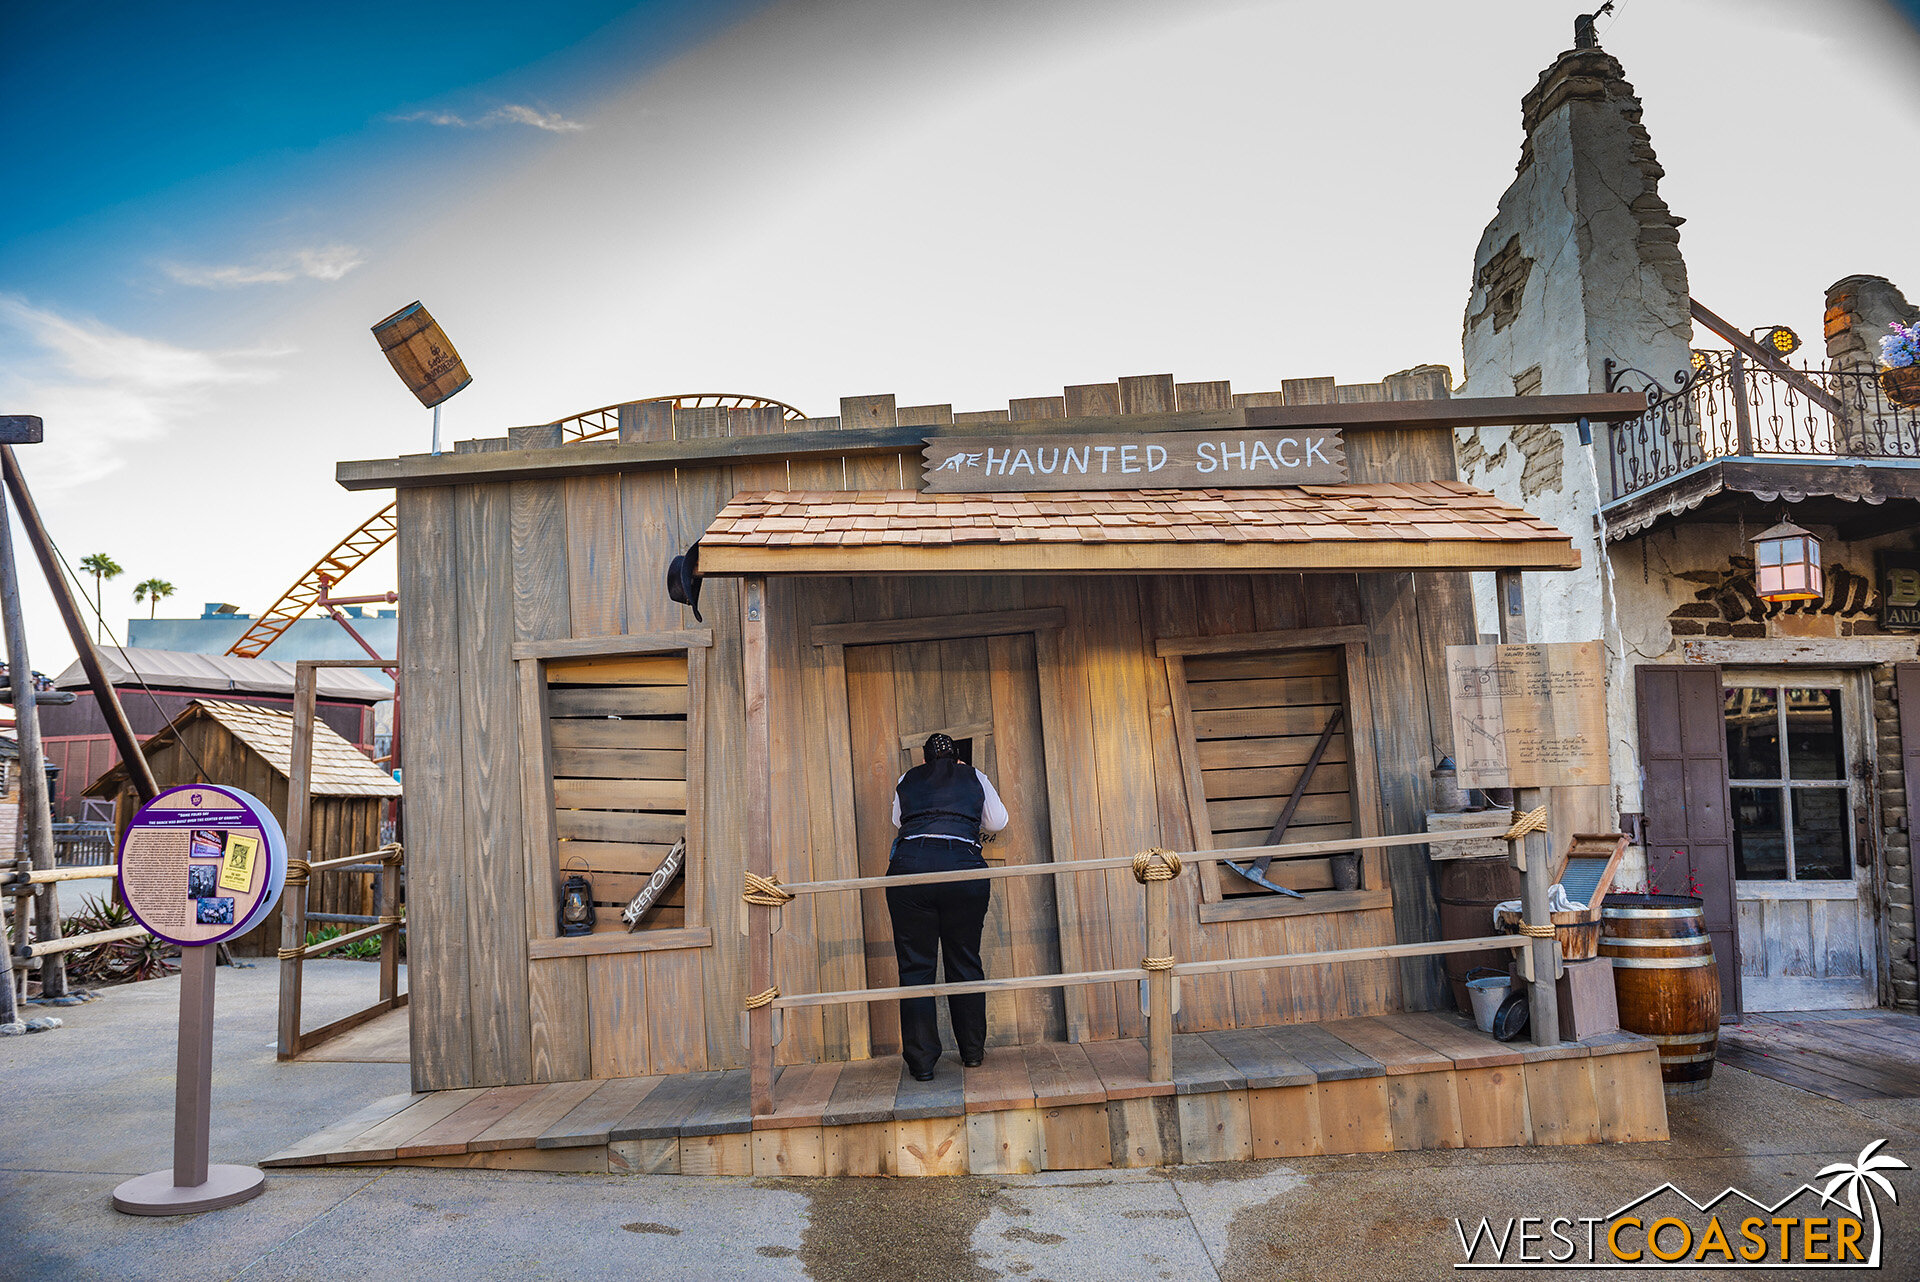  Guests who want to take part in the Haunted Shack photo op enter off the left.  But the person taking the photo stands in front of the door in the center. 